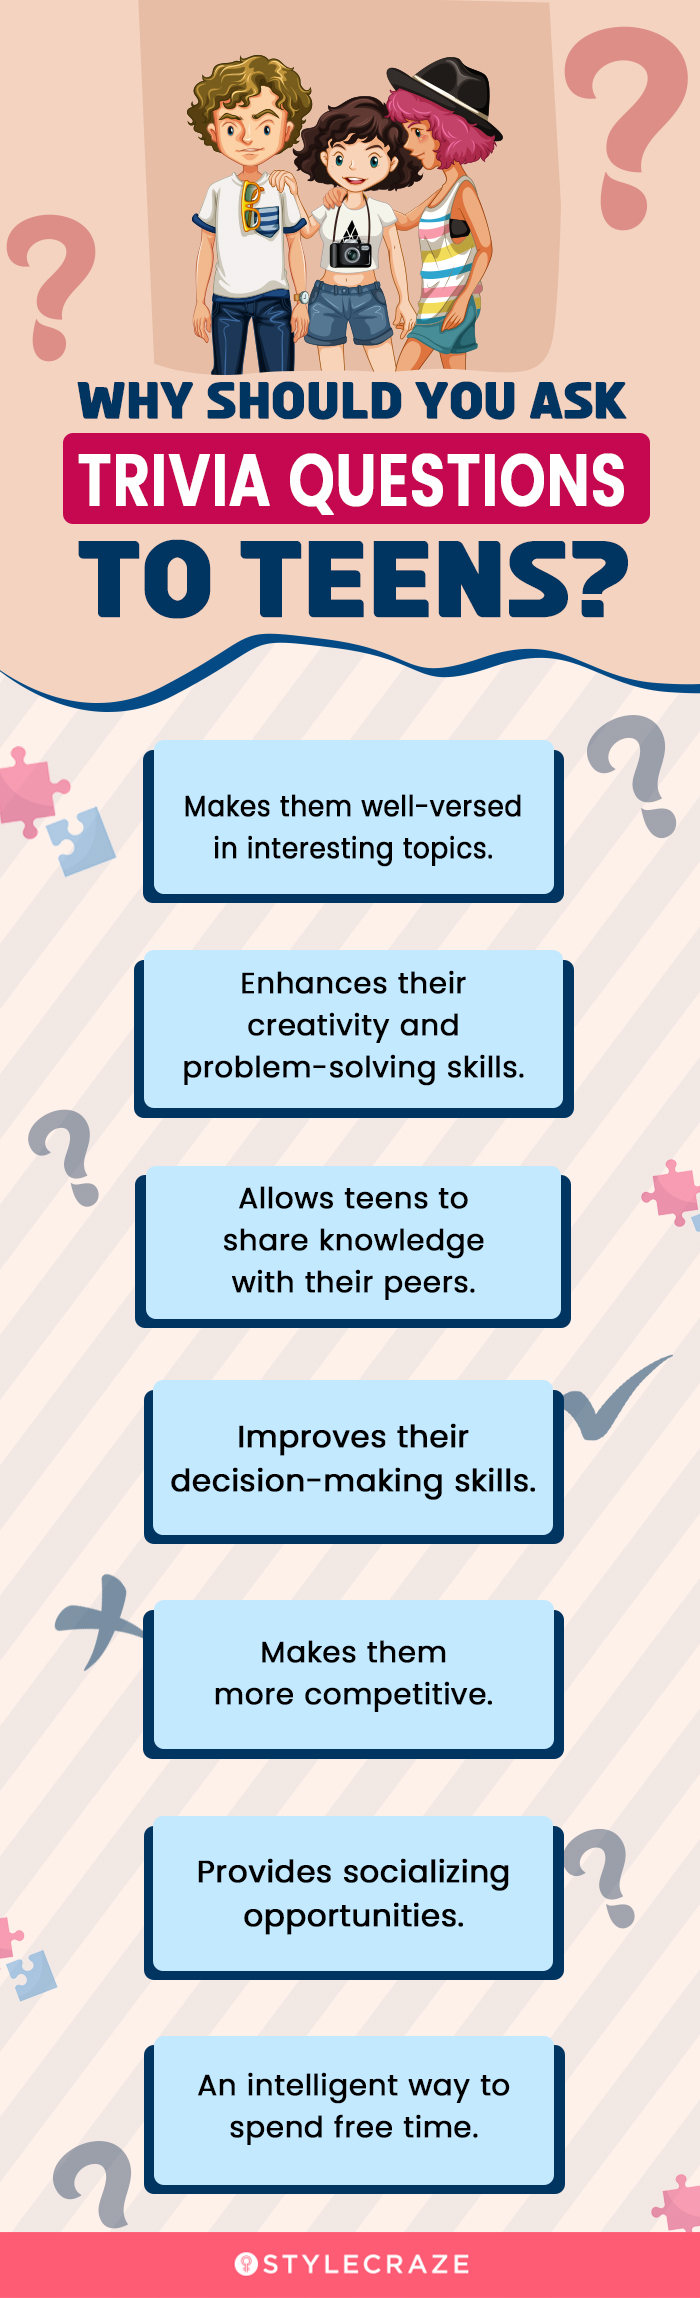 why should you ask trivia questions to teens [infographic]